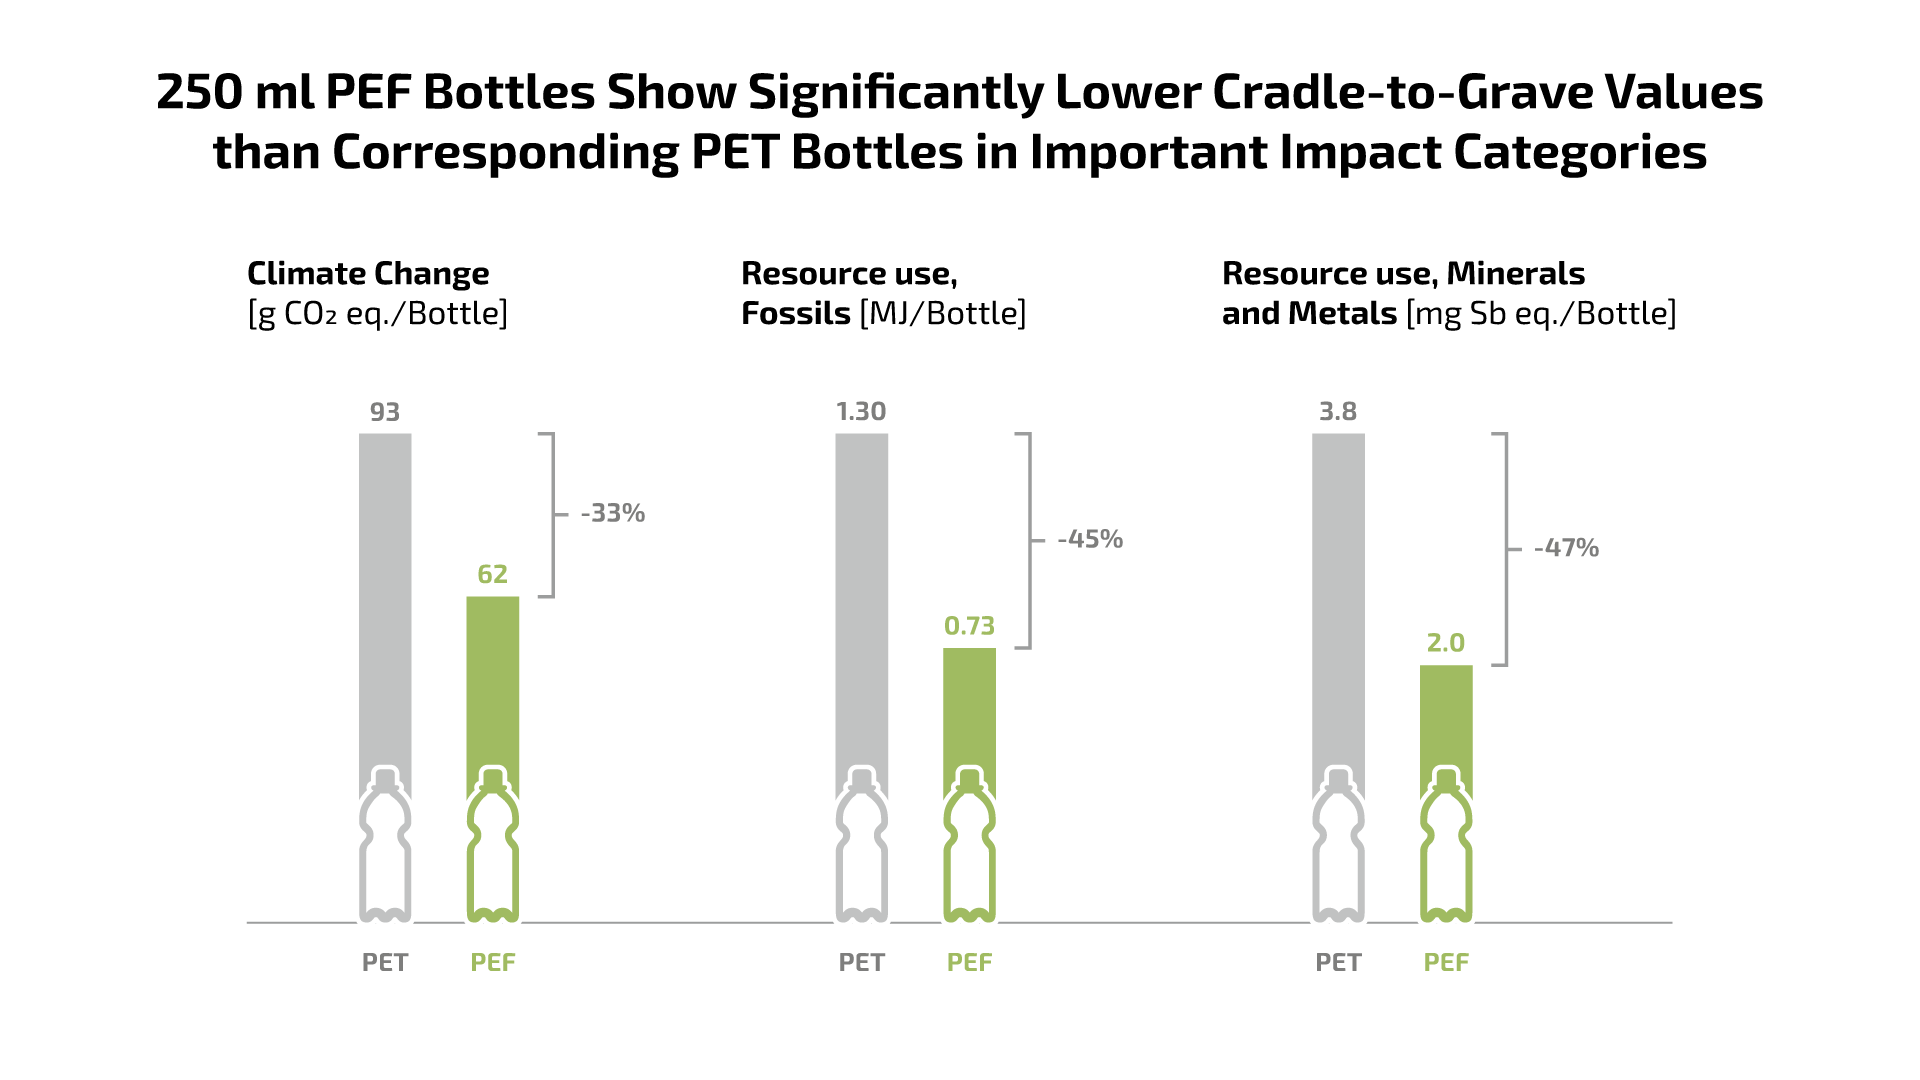 PEF bottles compared with corresponding PET bottles